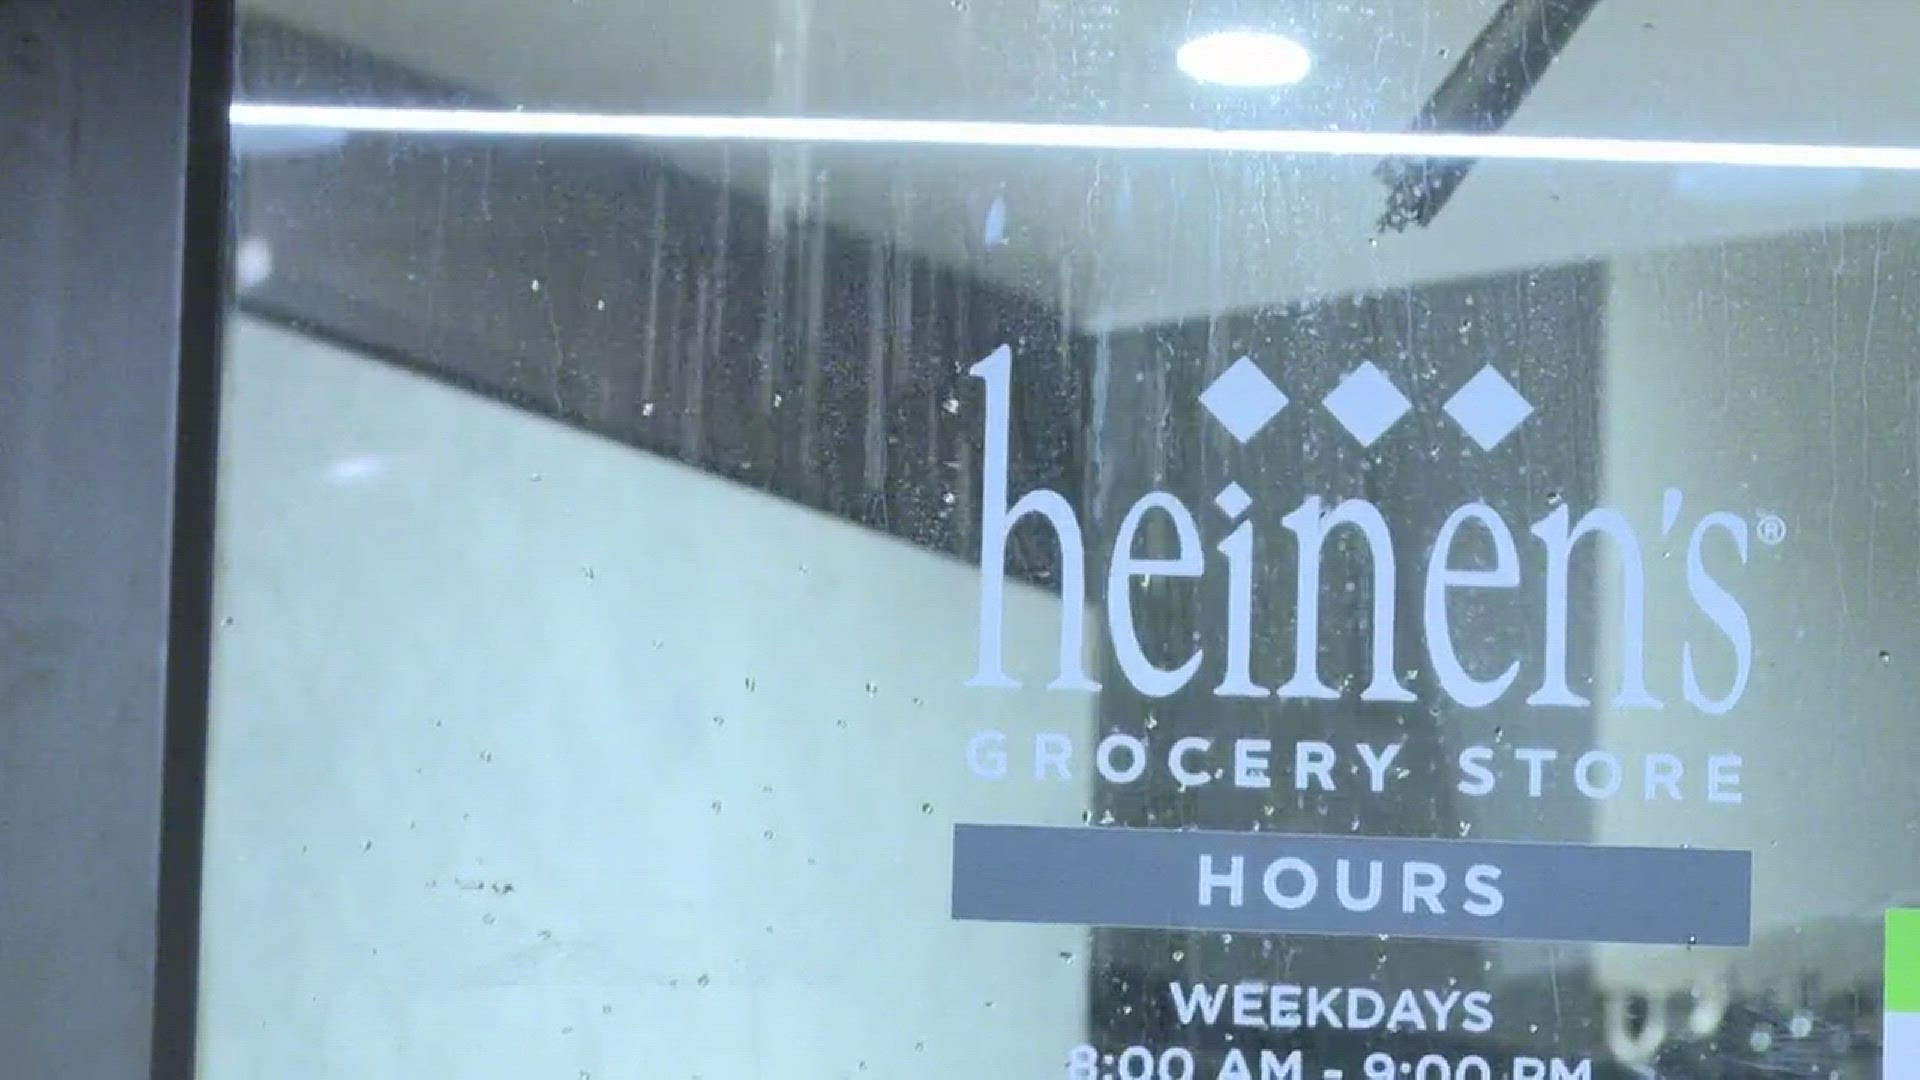 Jan. 8, 2018: WKYC's cameras captured water pouring down from the ceiling early Monday into the Heinen's store.